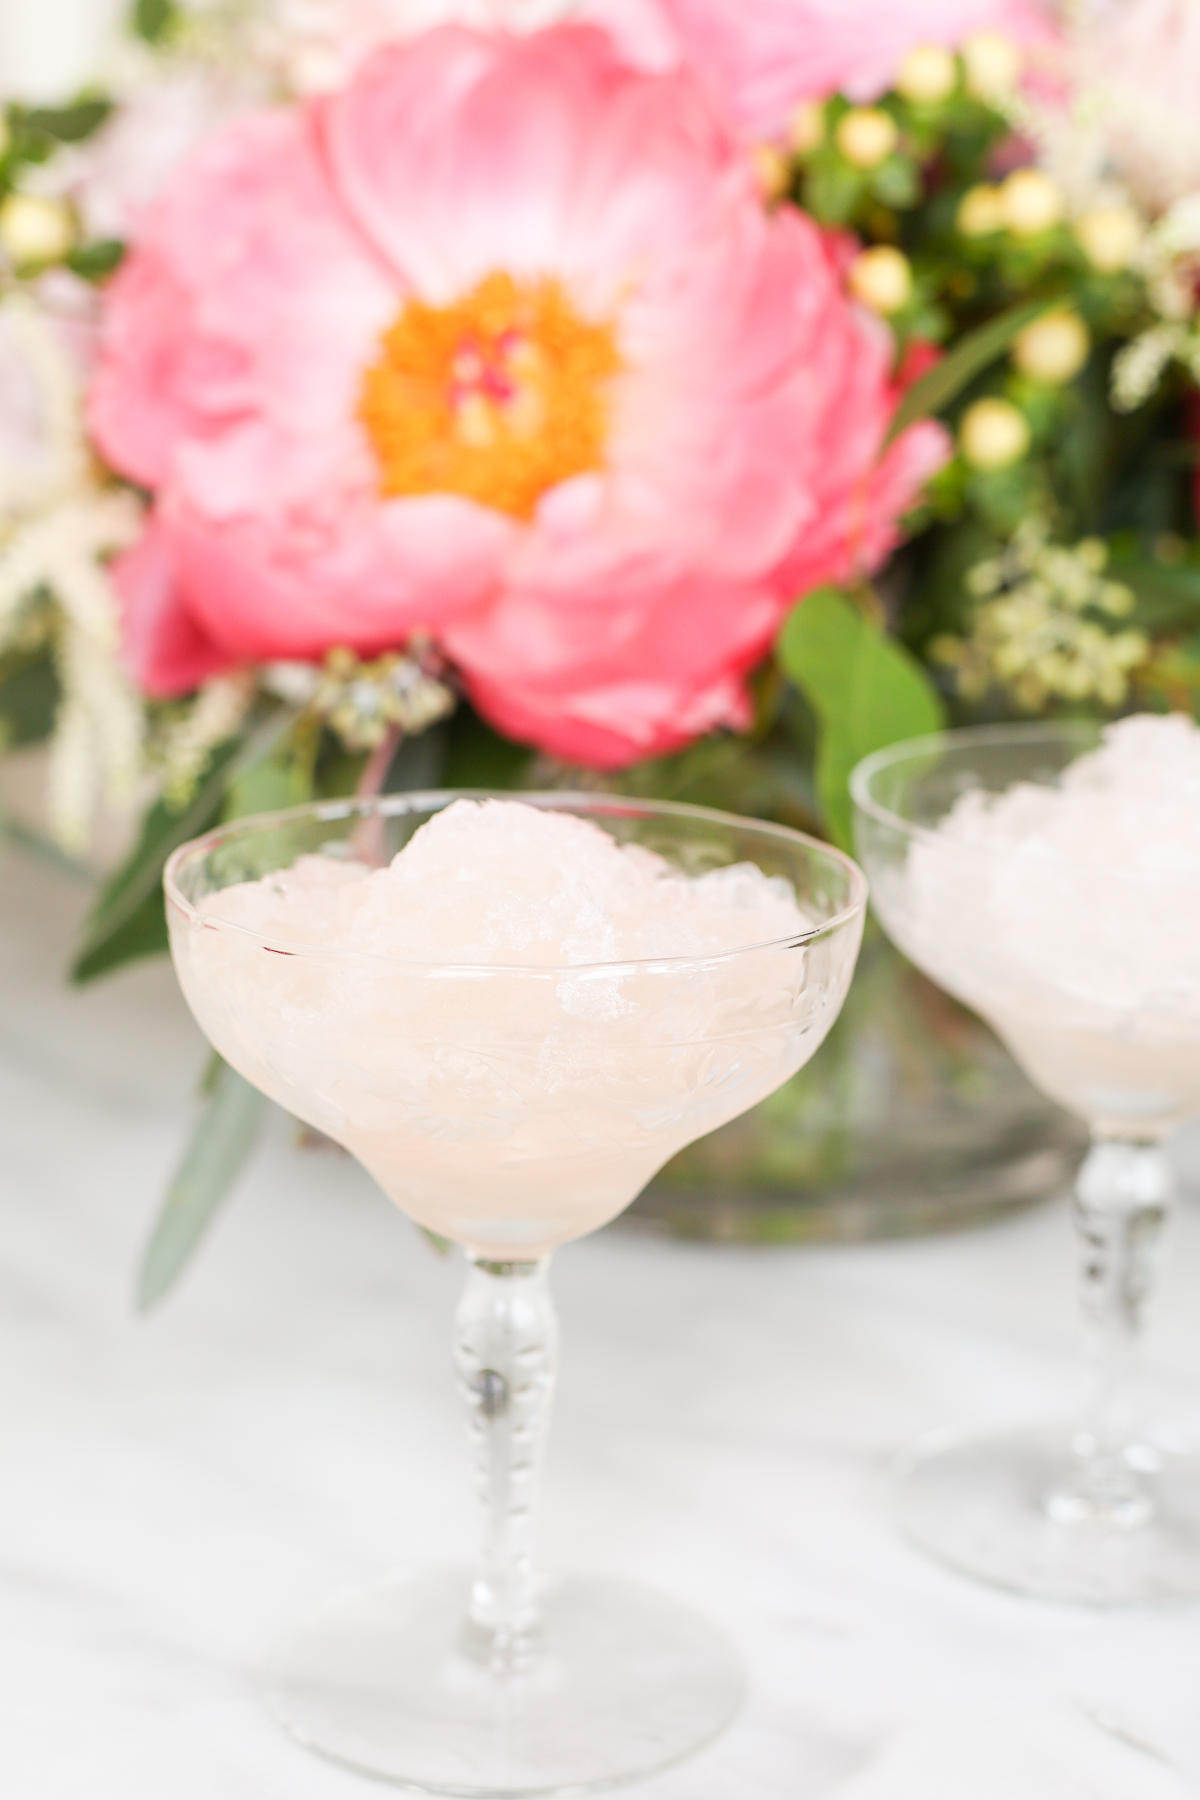 Two pink martini glasses filled with icy frosé, a refreshing cocktail made from a frosé recipe.